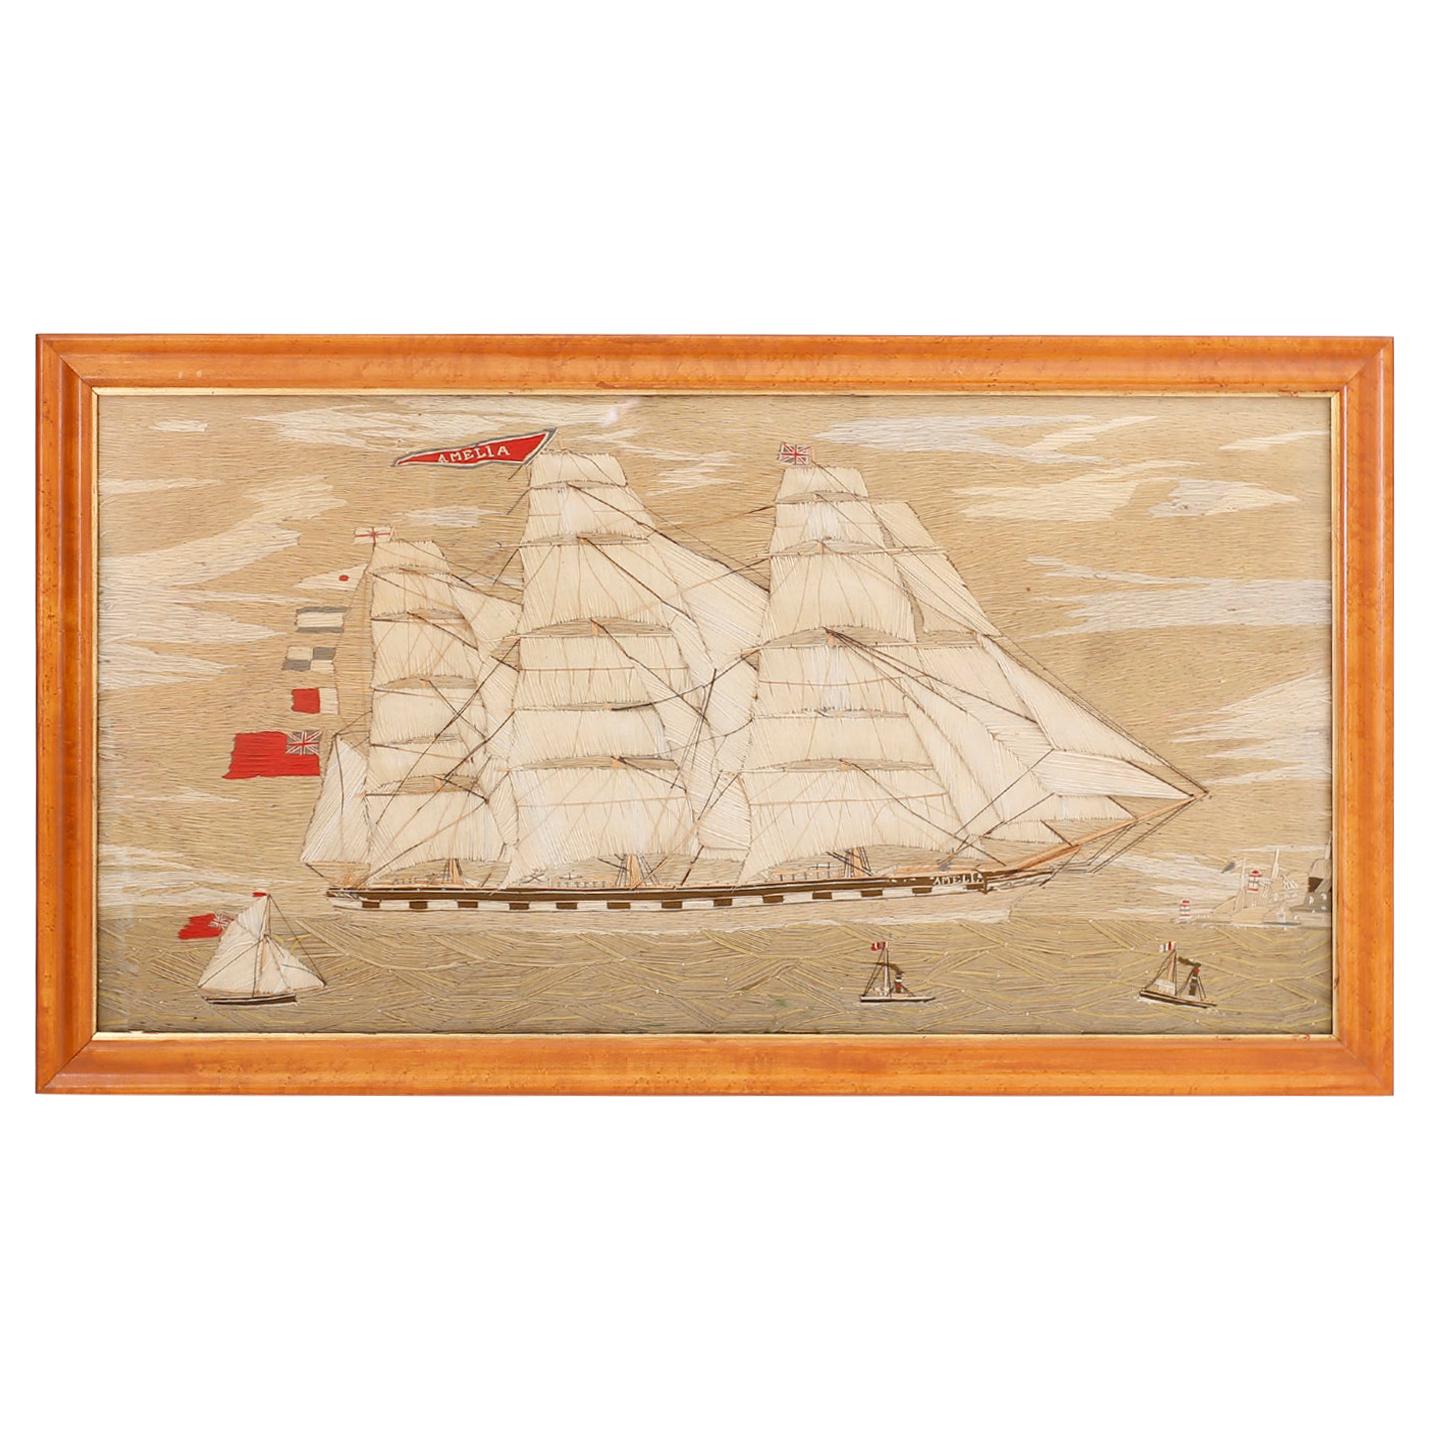 Wool Work 'Woolie' Needlepoint Embroidery of the British Ship Amelia